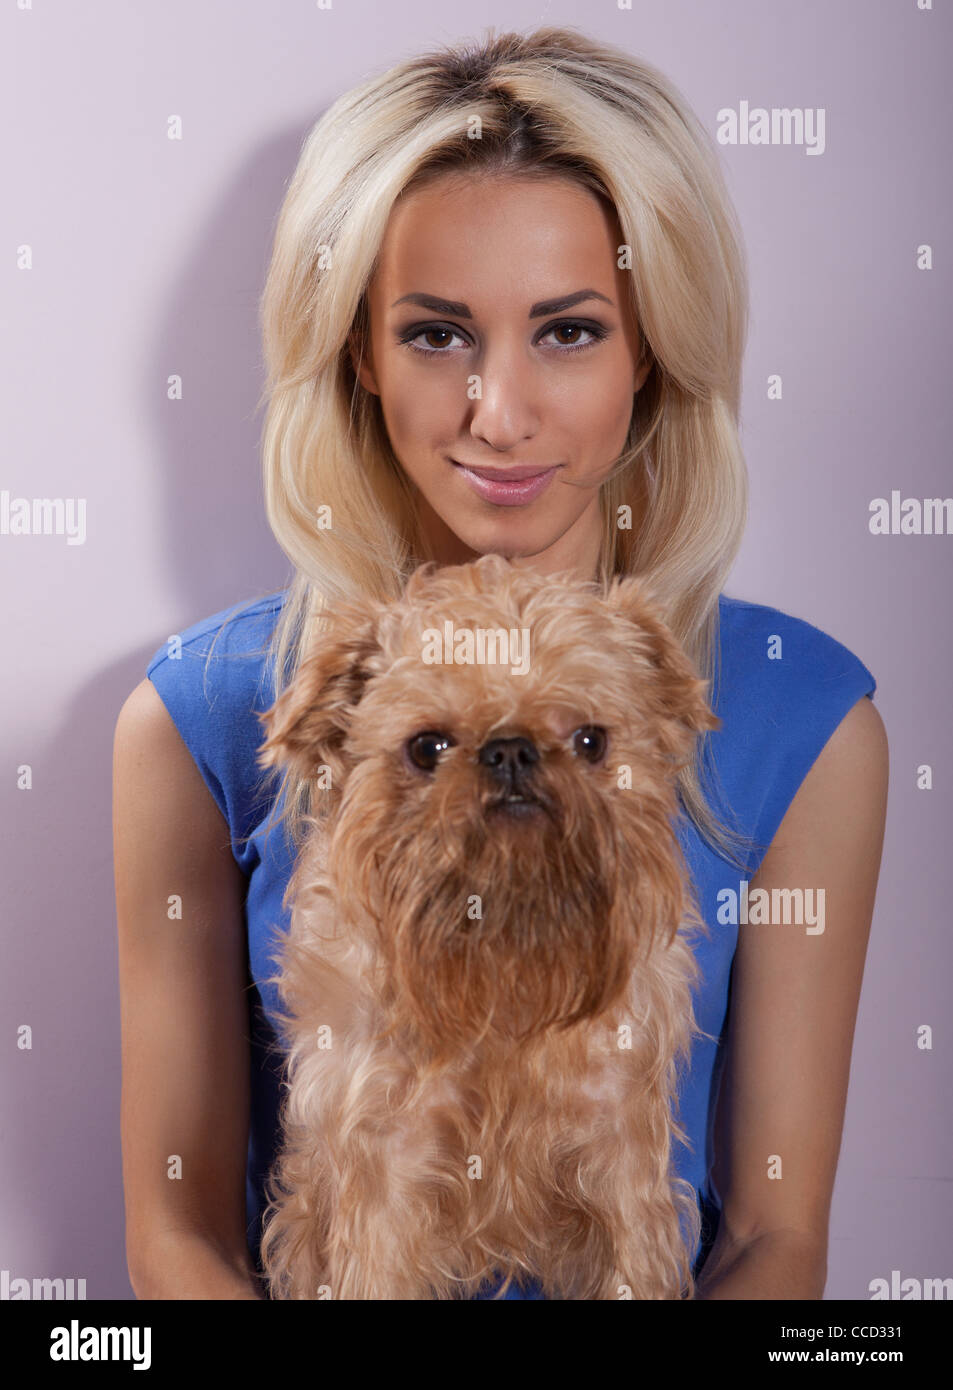 Young woman with a dog breed Griffon Bruxellois Stock Photo